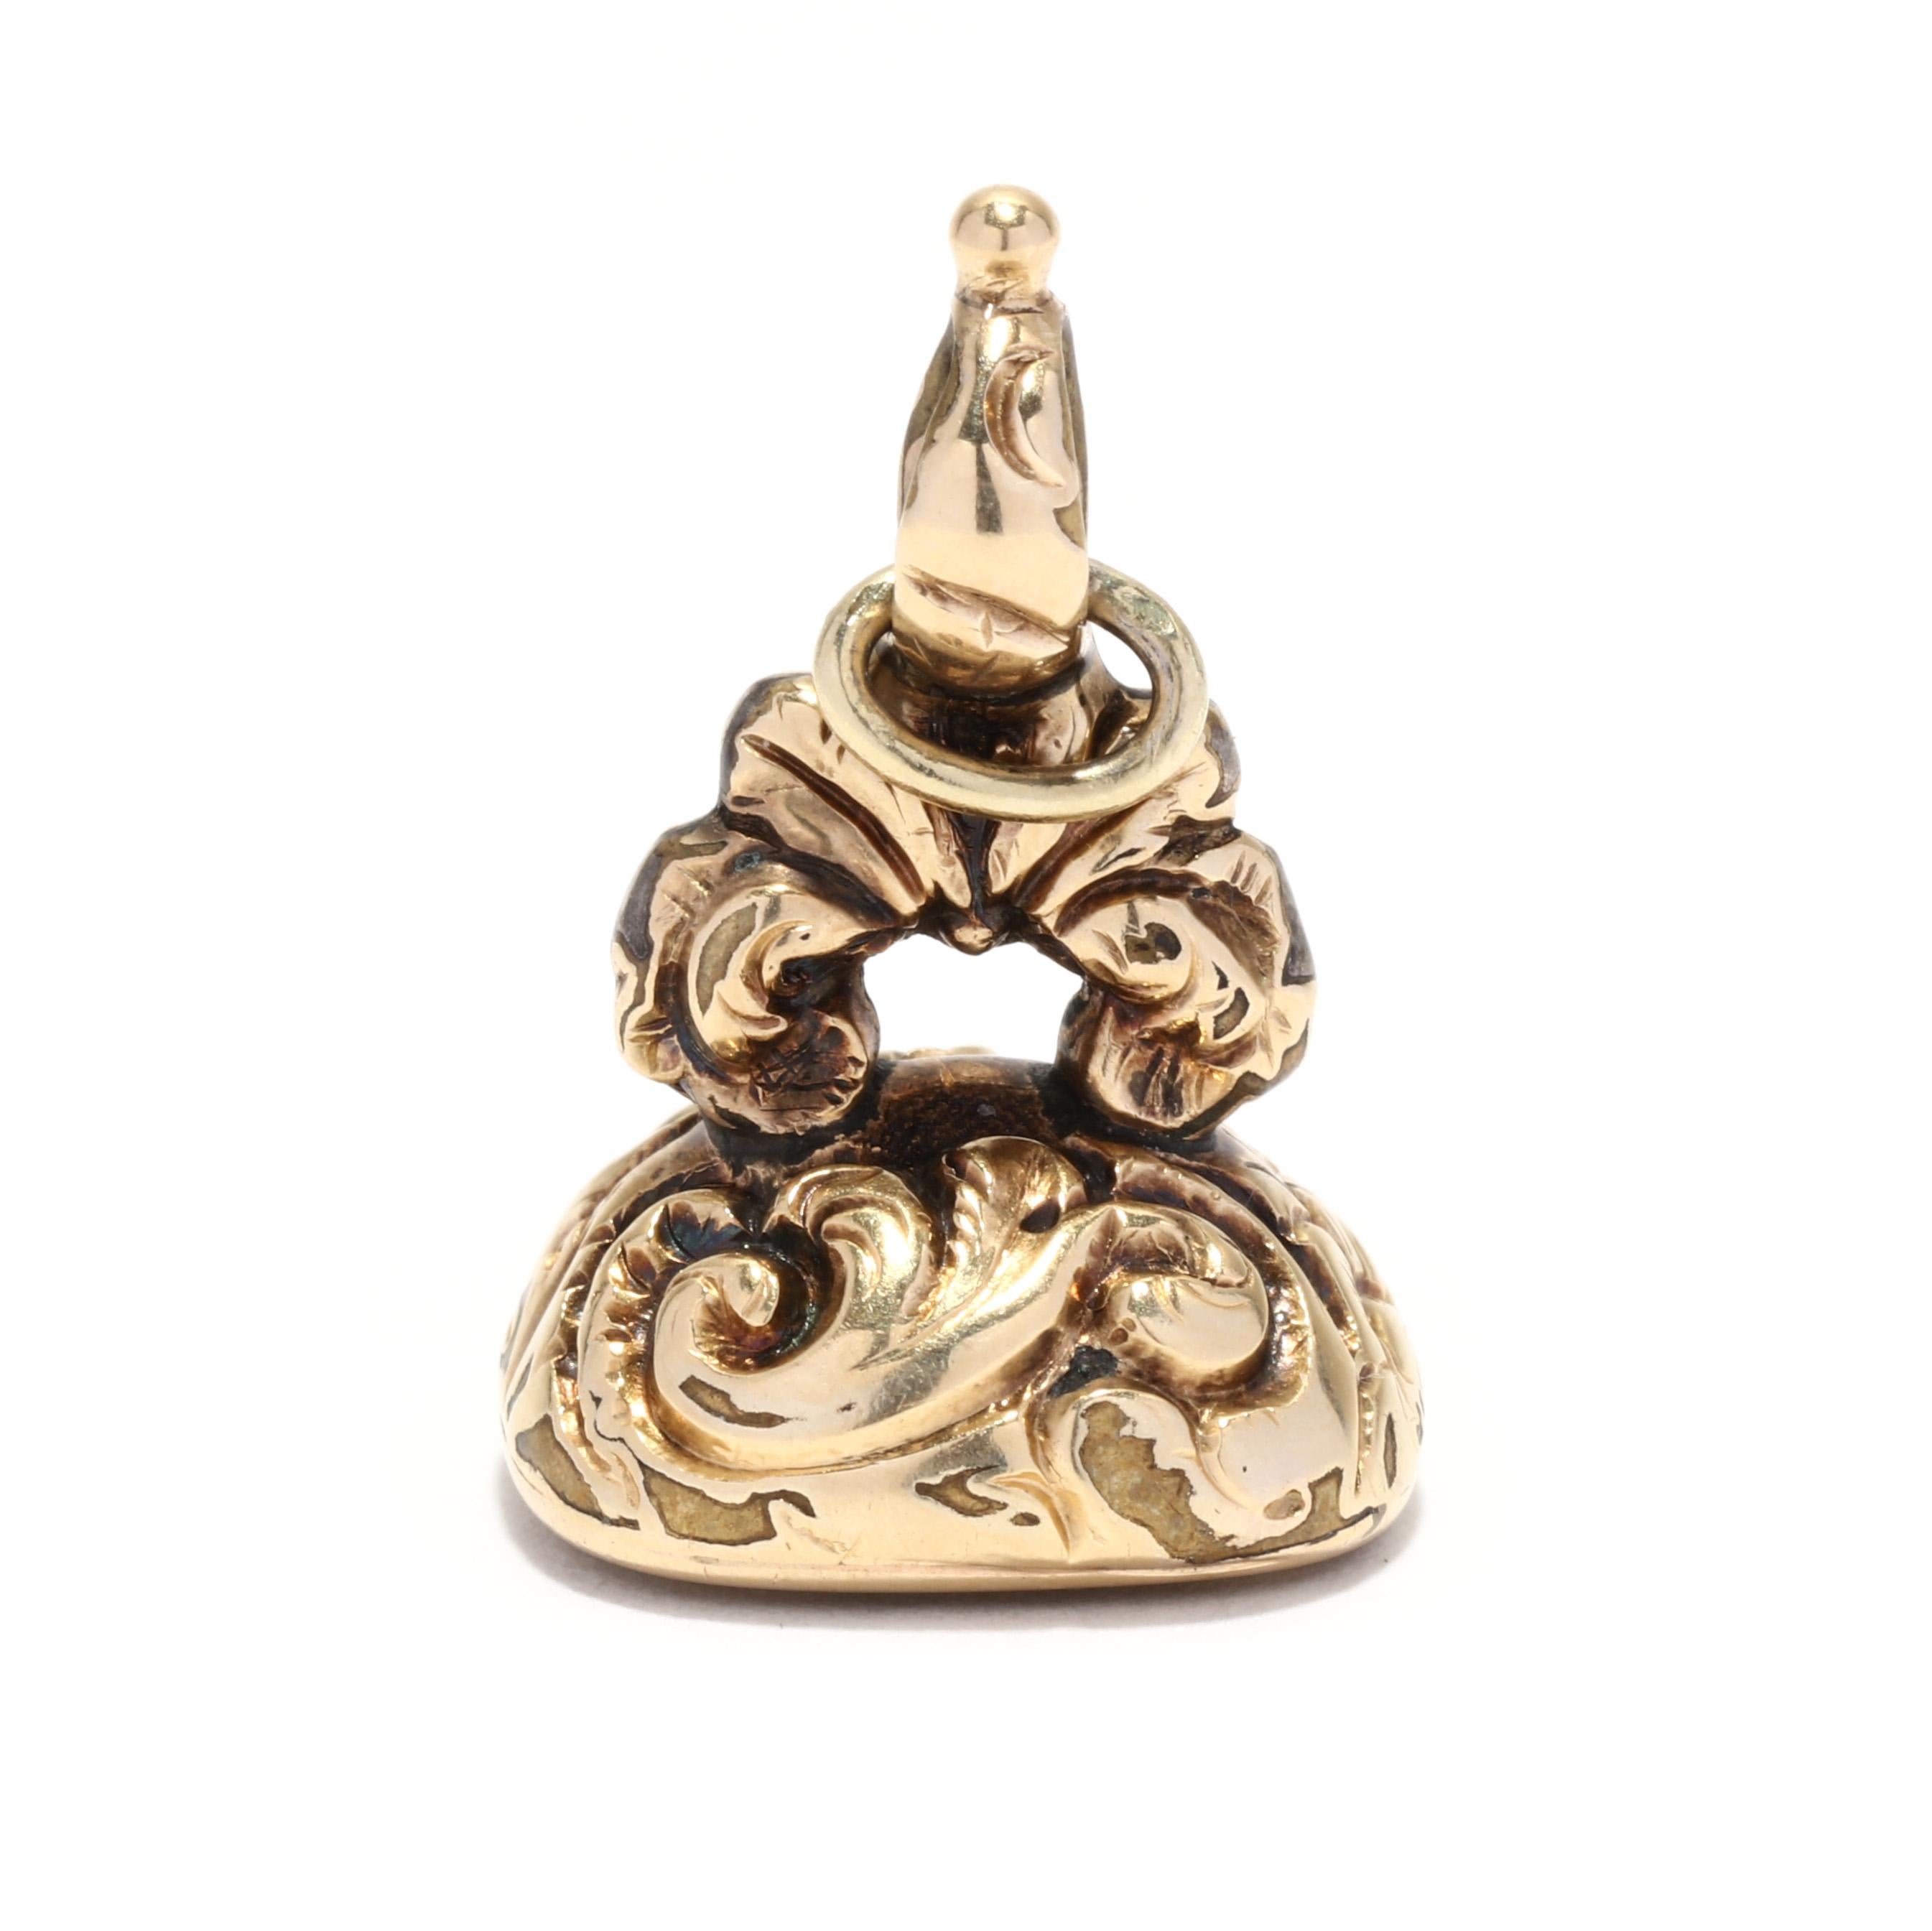 A Victorian 14 karat yellow gold engraved intaglio watch fob charm. This charm features a bezel set, cushion cut carved intaglio chalcedony depicting the profile of a man, set in an intricately engraved foliate and scroll motif watch fob.

Length: